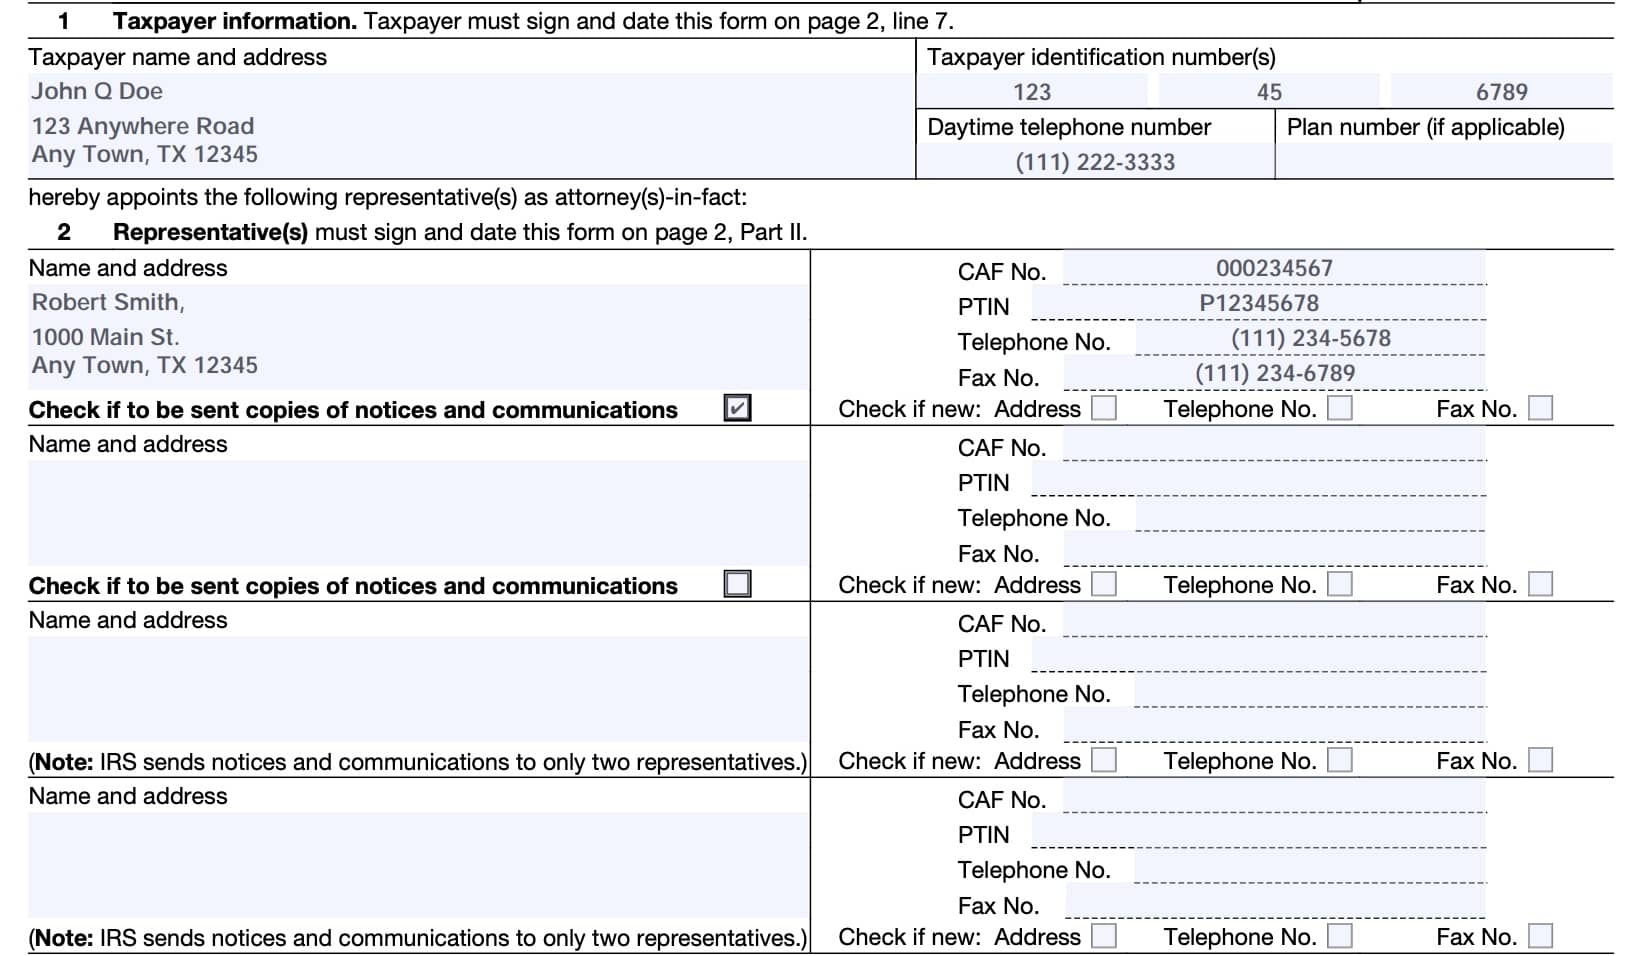 irs form 2848, line 1: taxpayer information and line 2: representative(s)